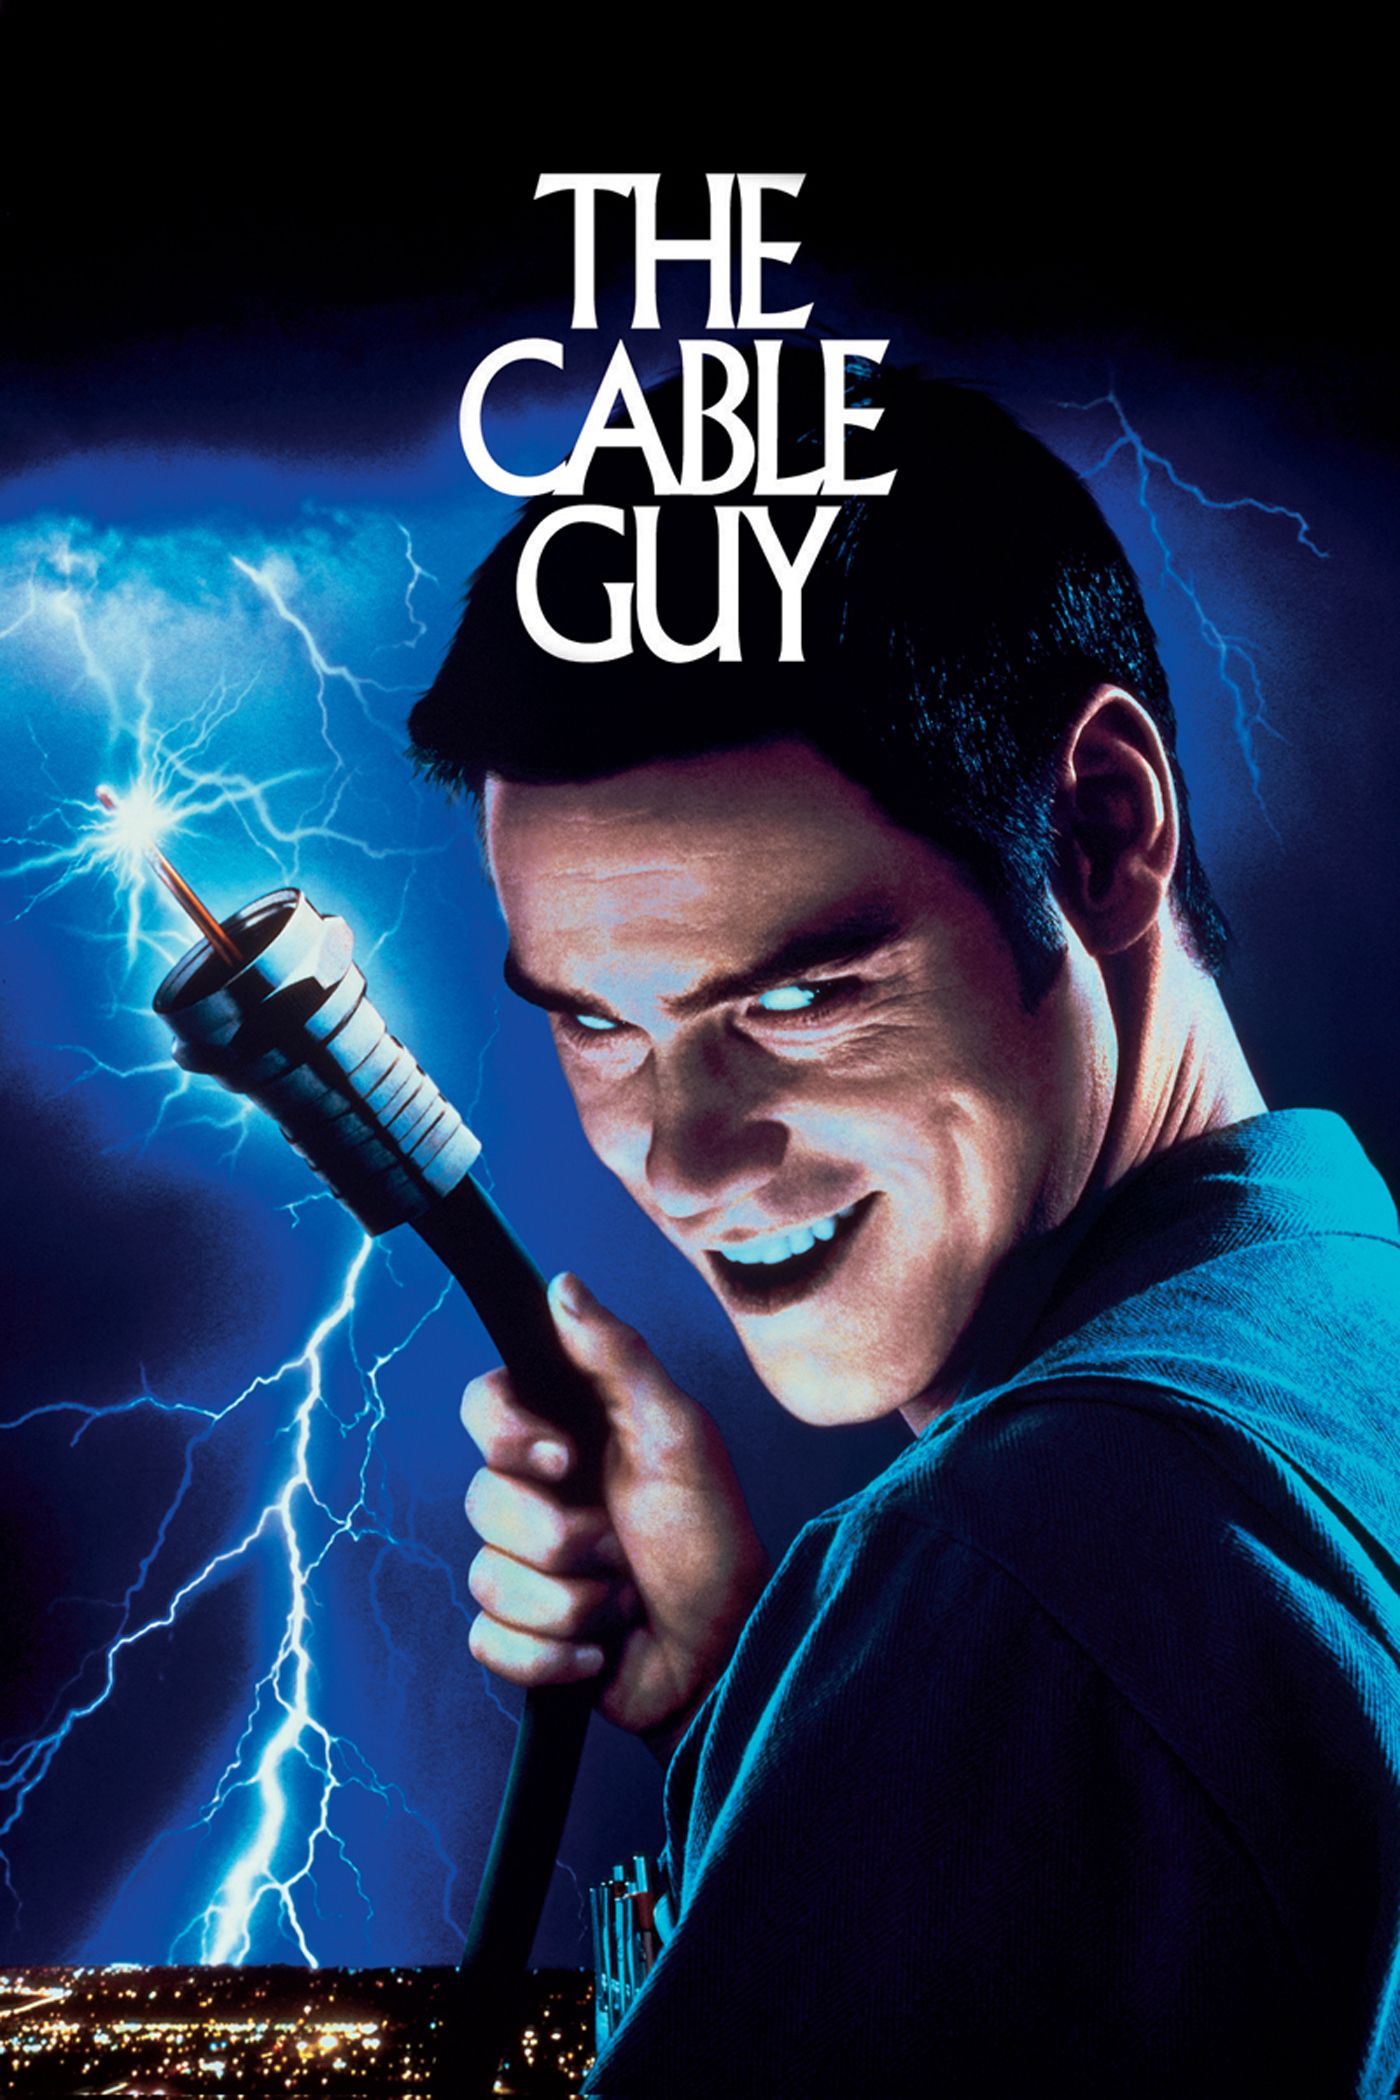 chanise george share teasing the cable guy photos